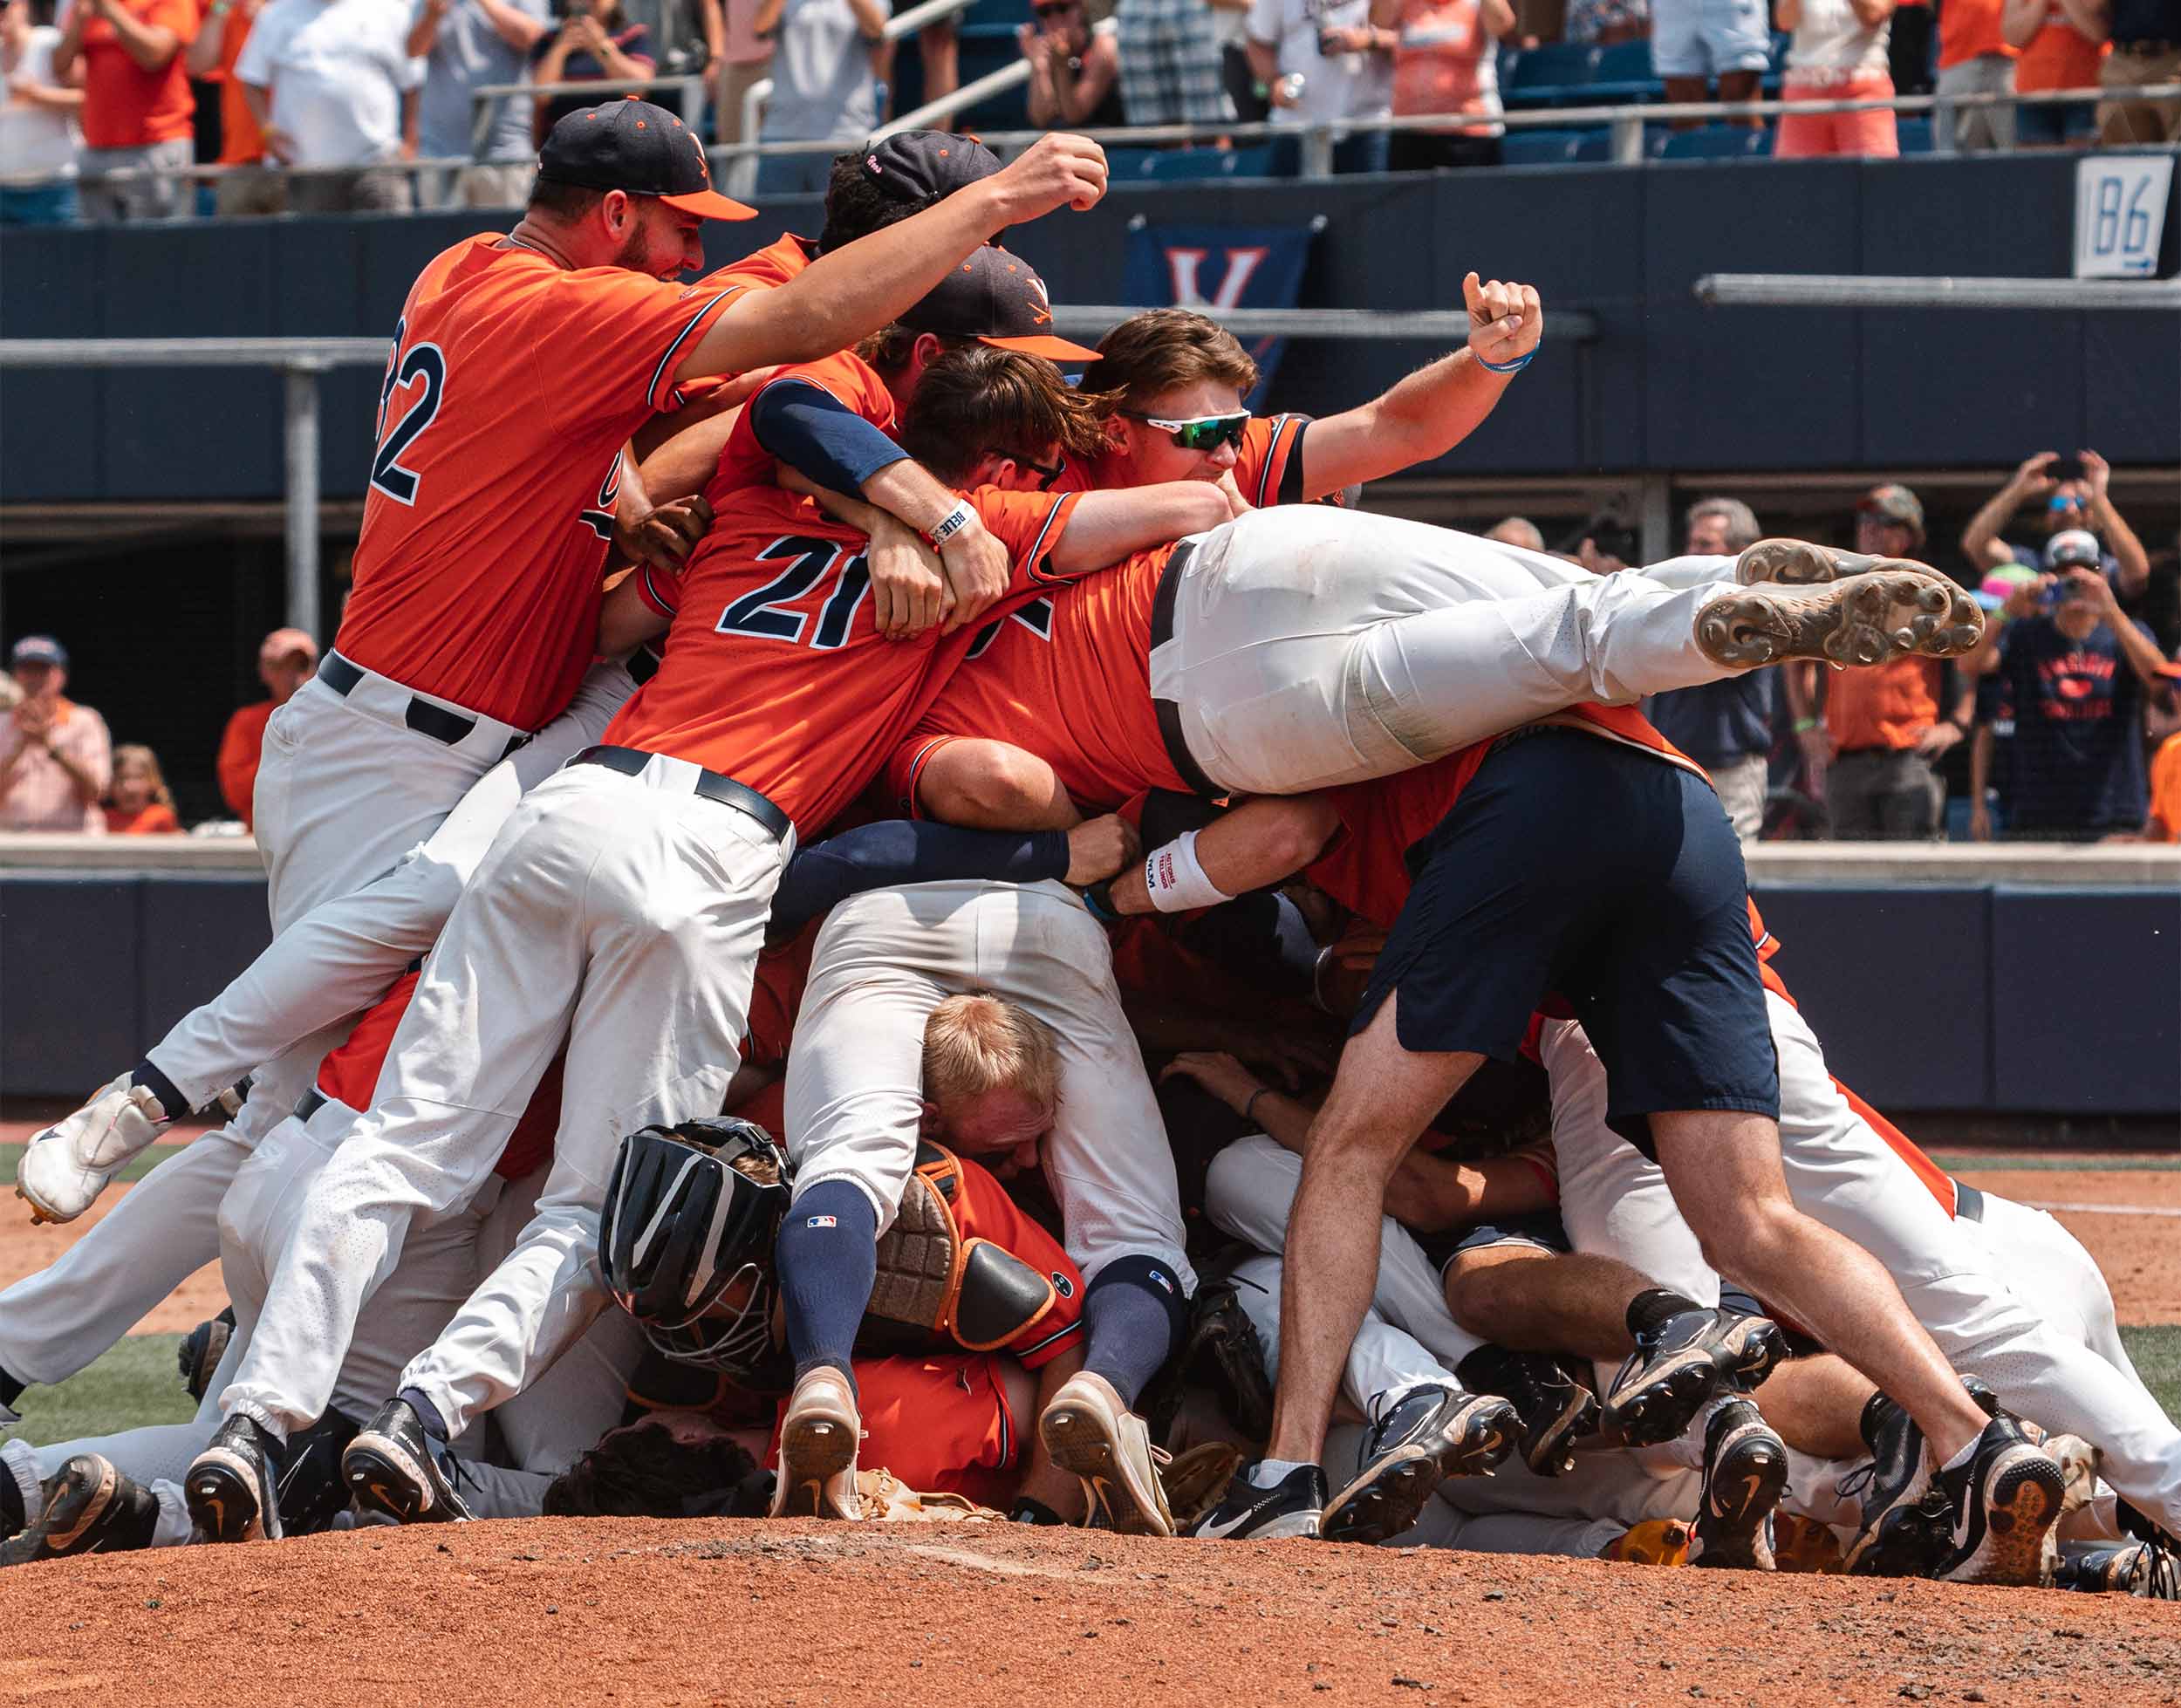 Baseball players mid pile up on the field